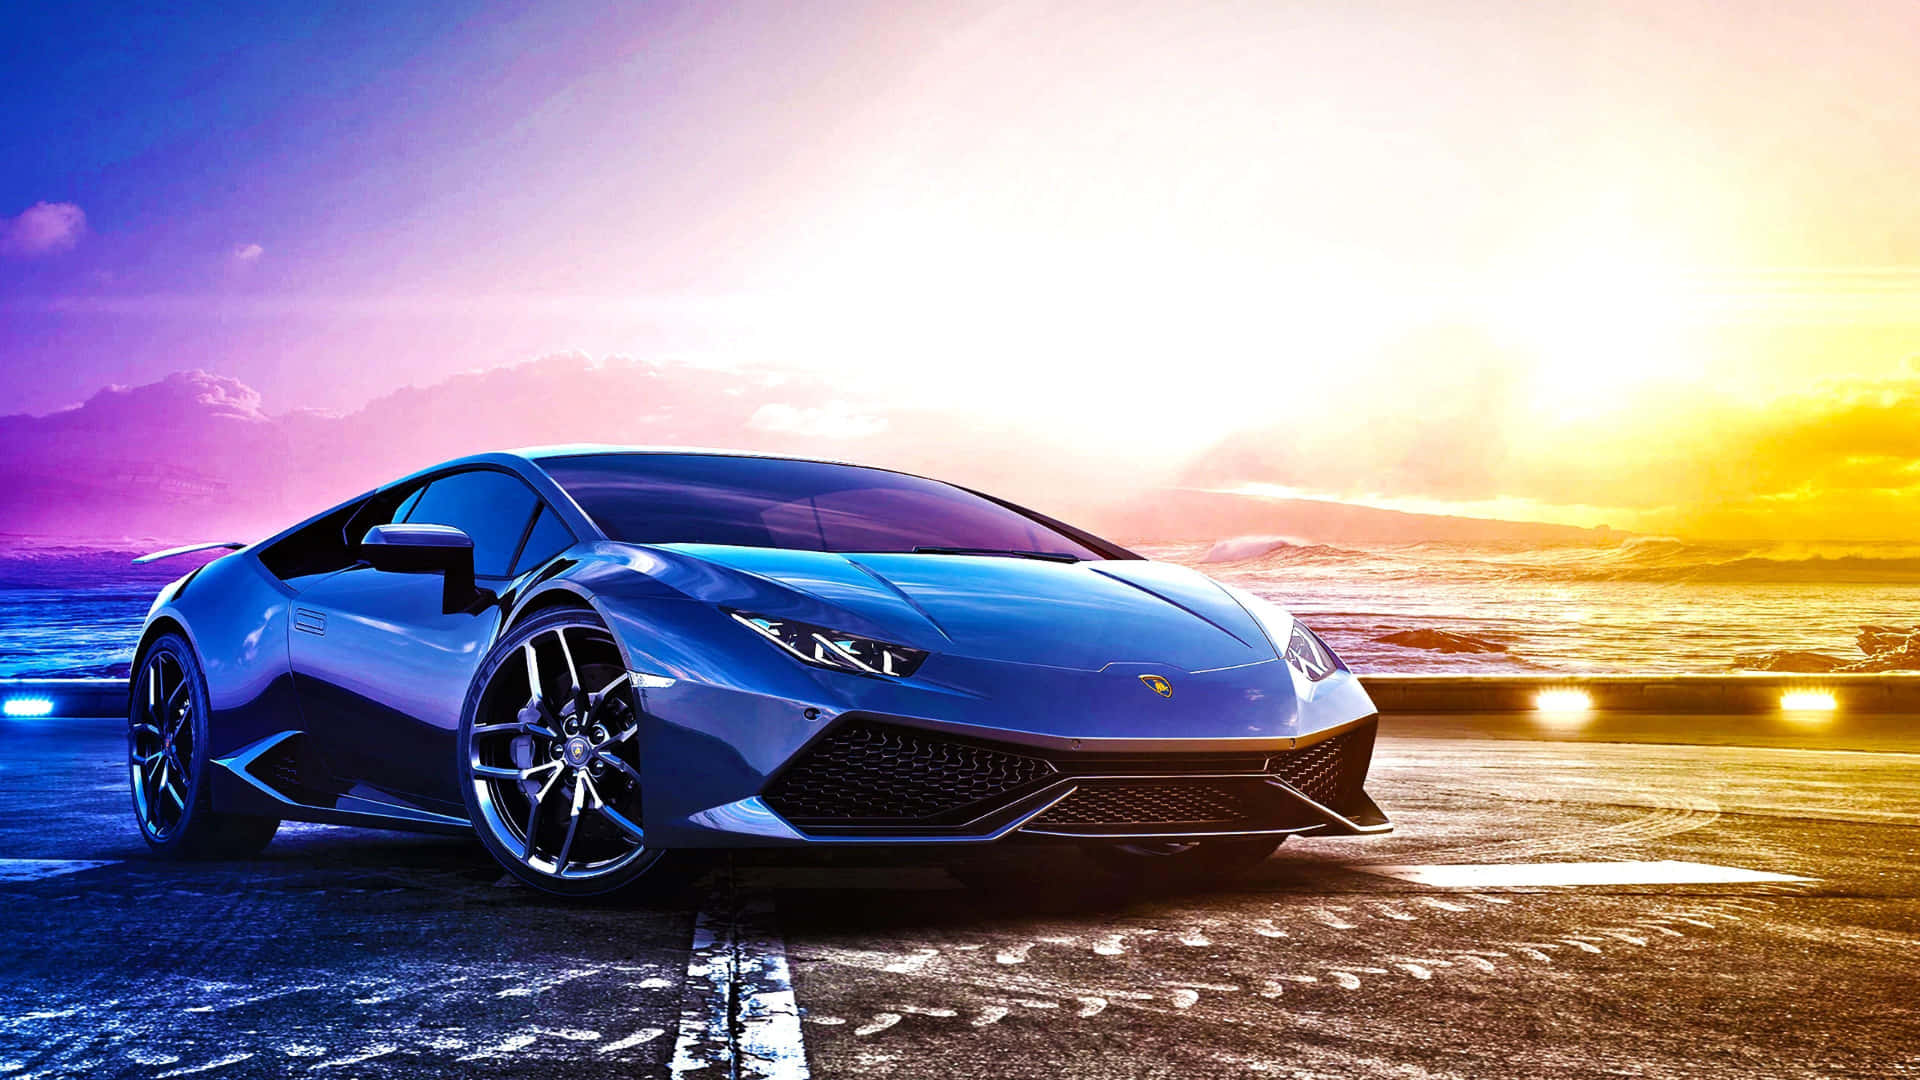 Experience Speed and Luxury with a Lamborghini